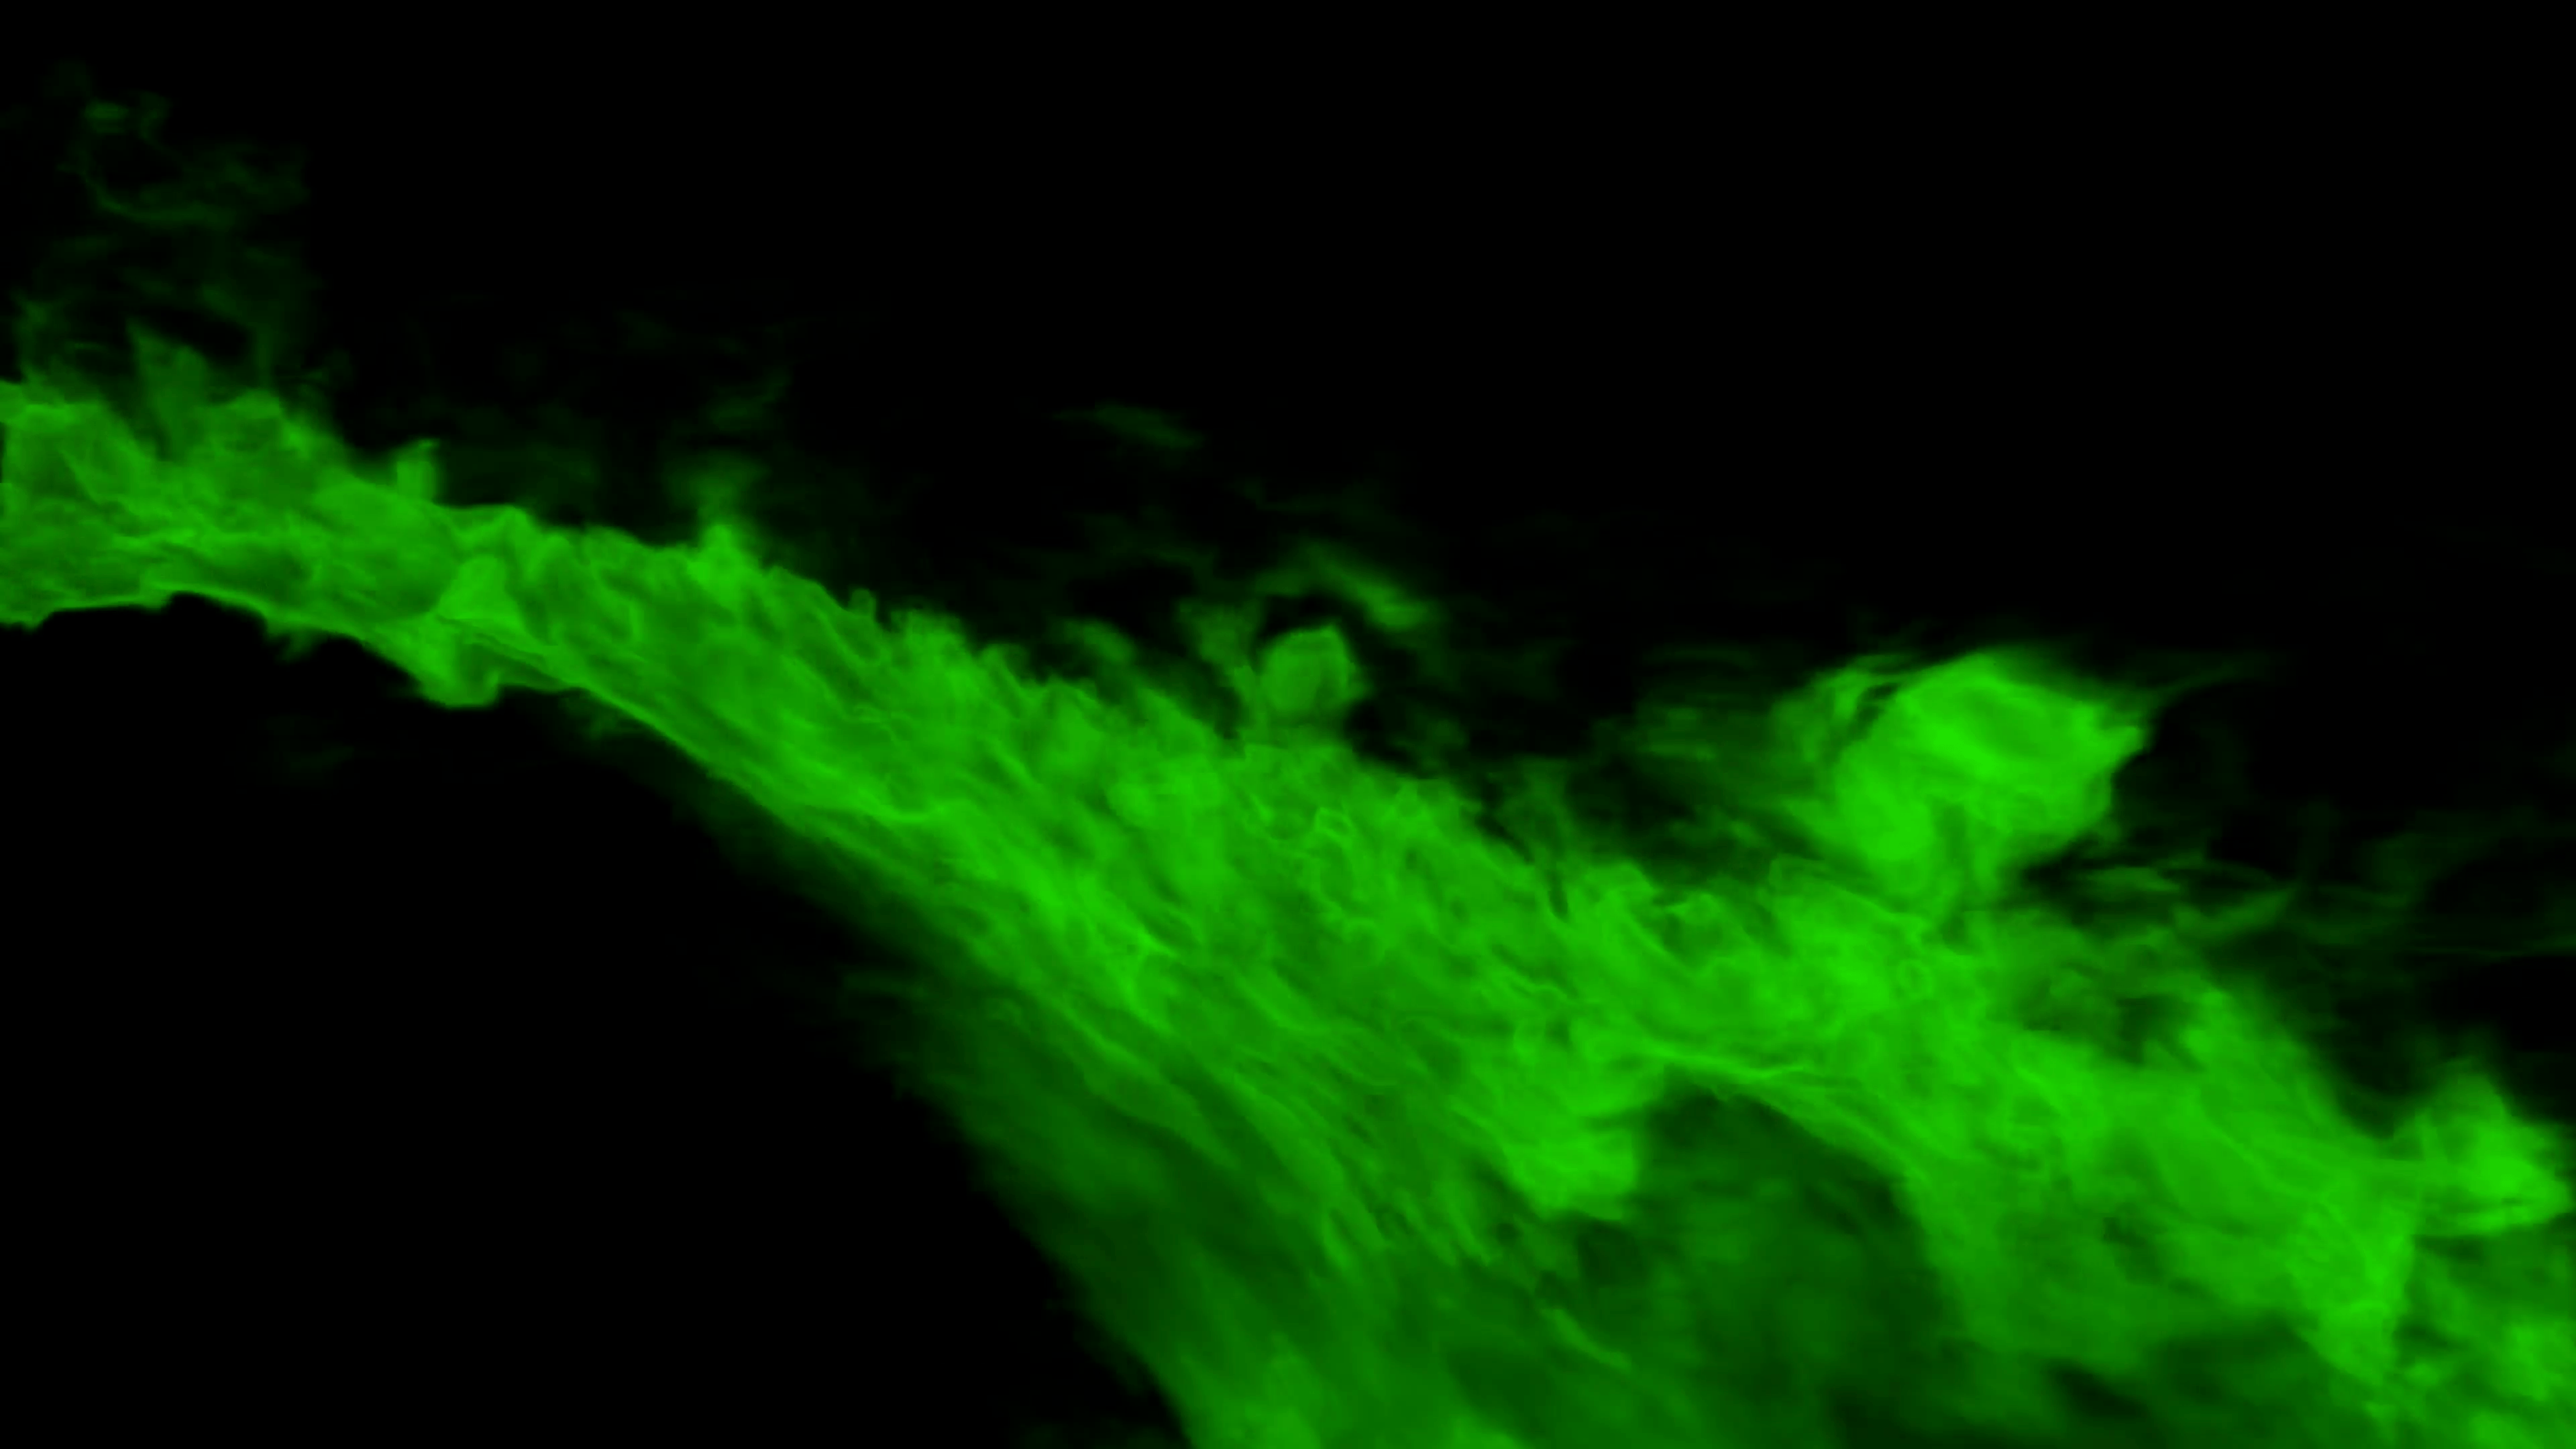 Animated stream, jet of green toxic smoke or gas spreading against